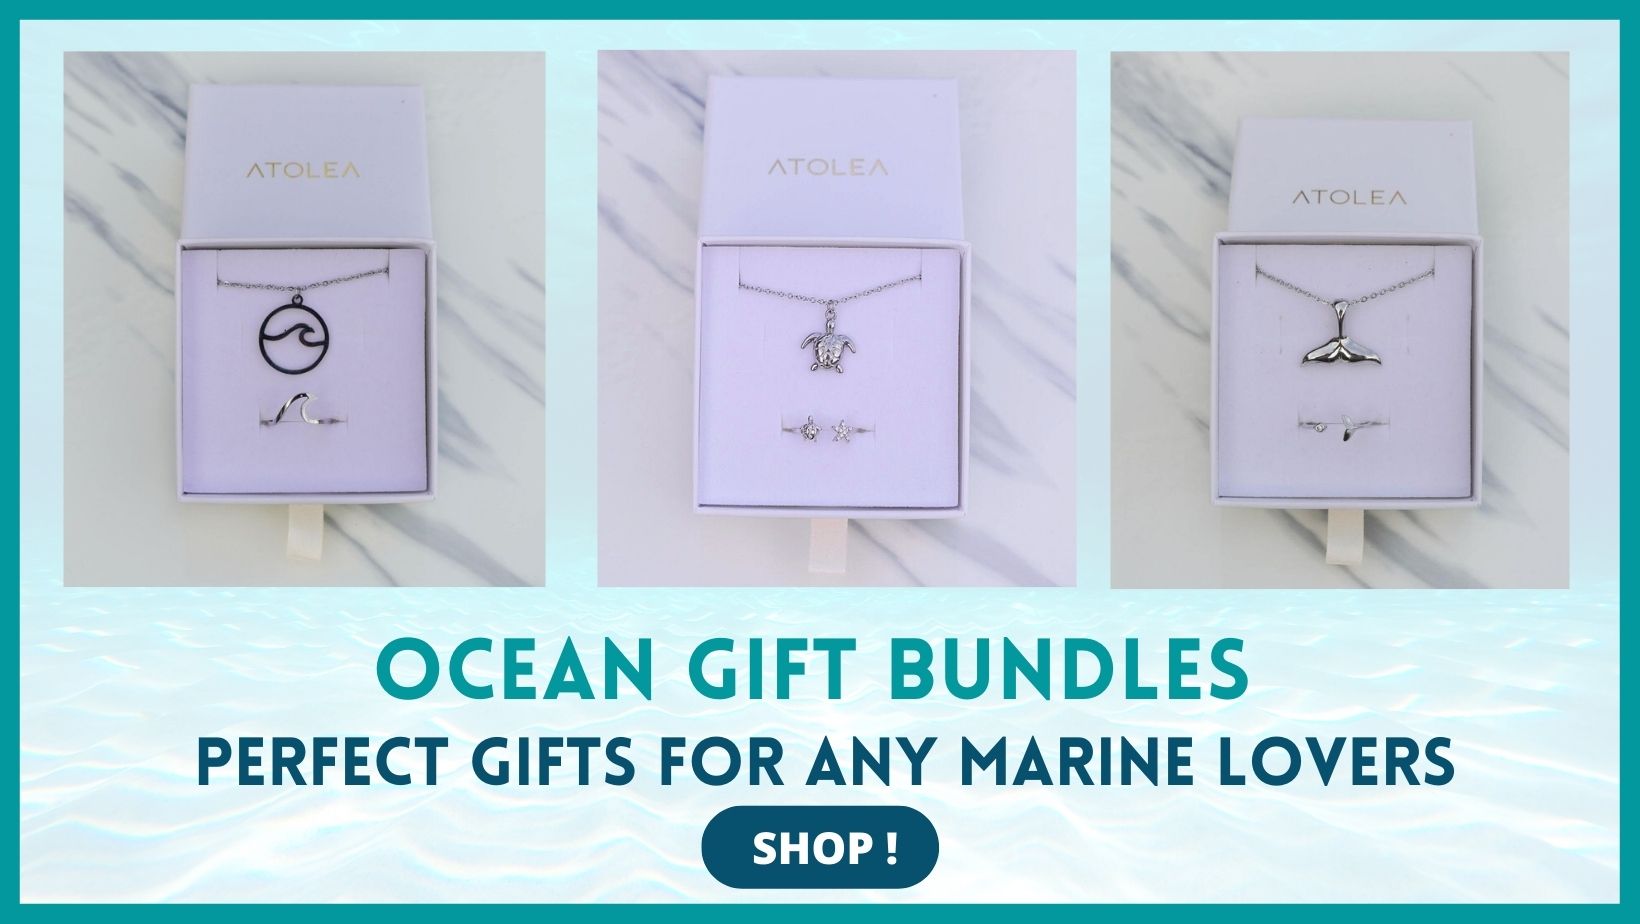 Gifts for marine lover they will surely love